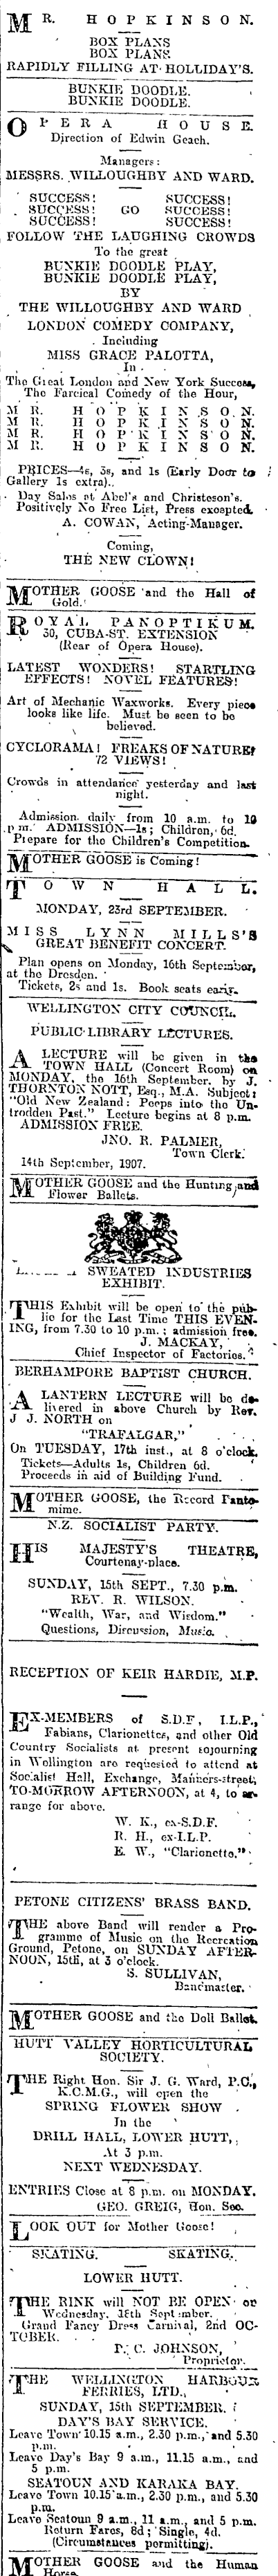 Papers Past Newspapers Evening Post 14 September 1907 Page 6 Advertisements Column 4